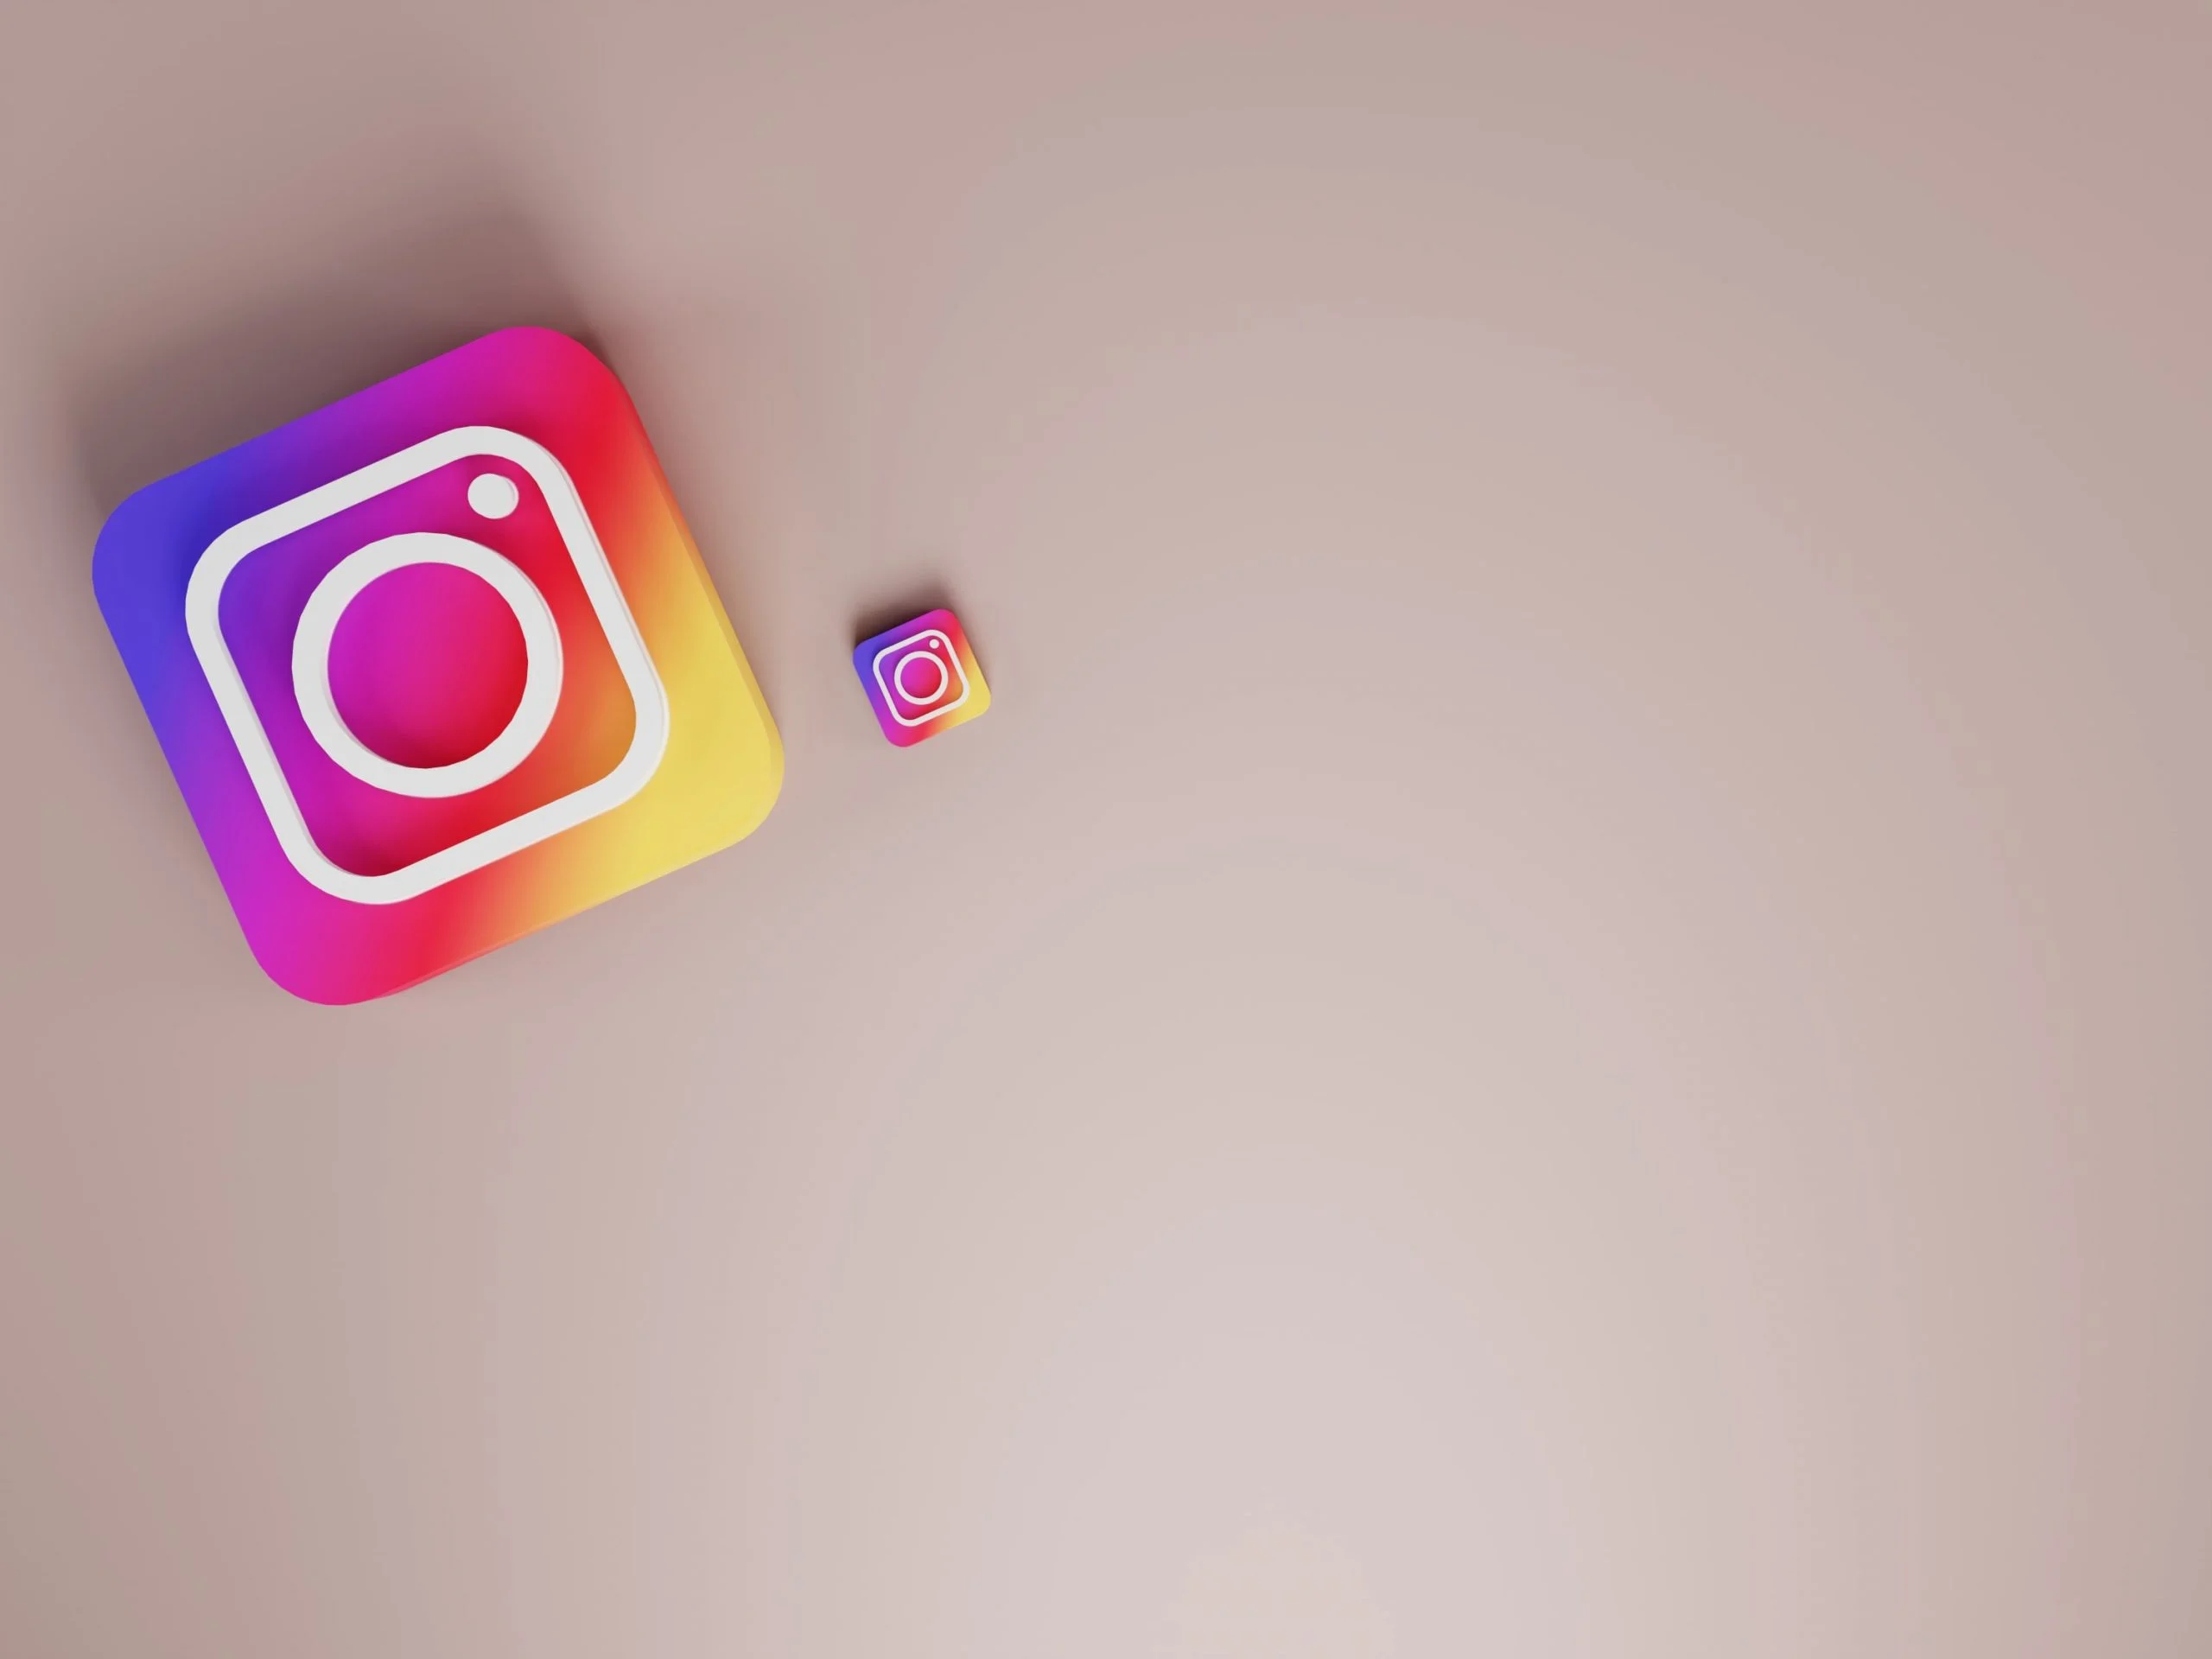 Instagram Notes Explained: What the Heck Are They For?